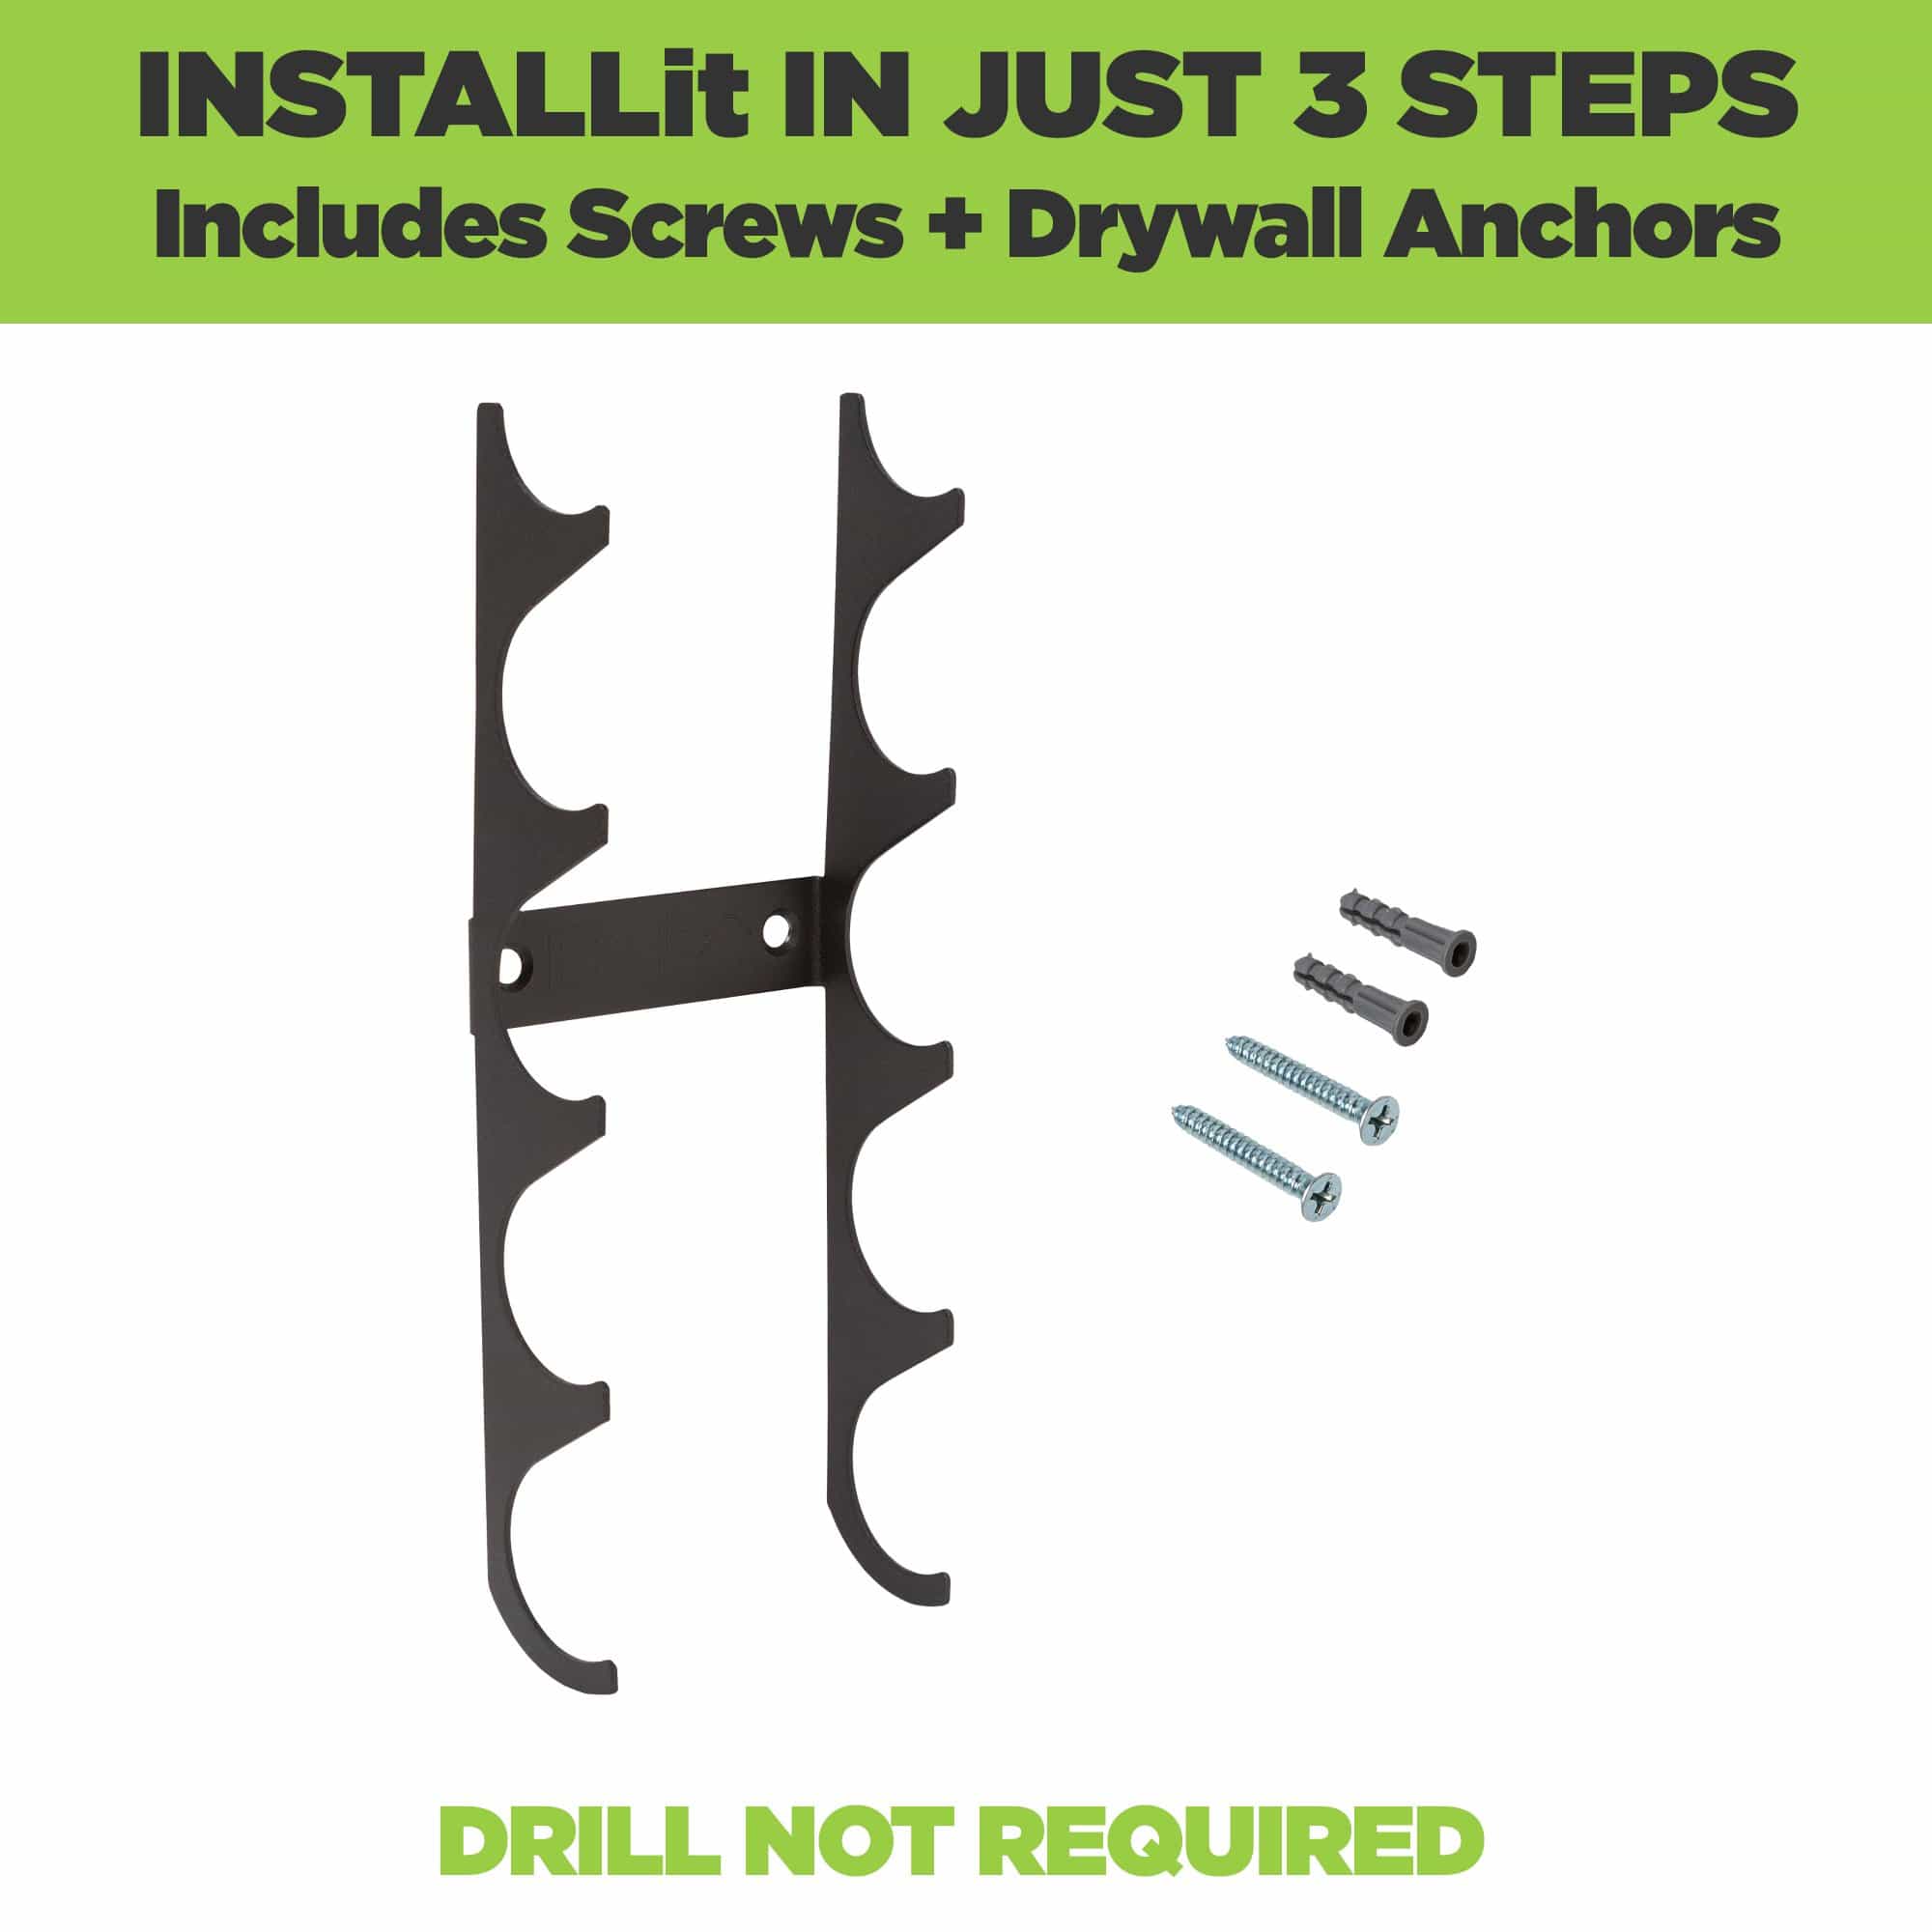 HIDEit Mini Bat Mount installs in 3 easy steps and comes with all necessary hardware. Drill not required.